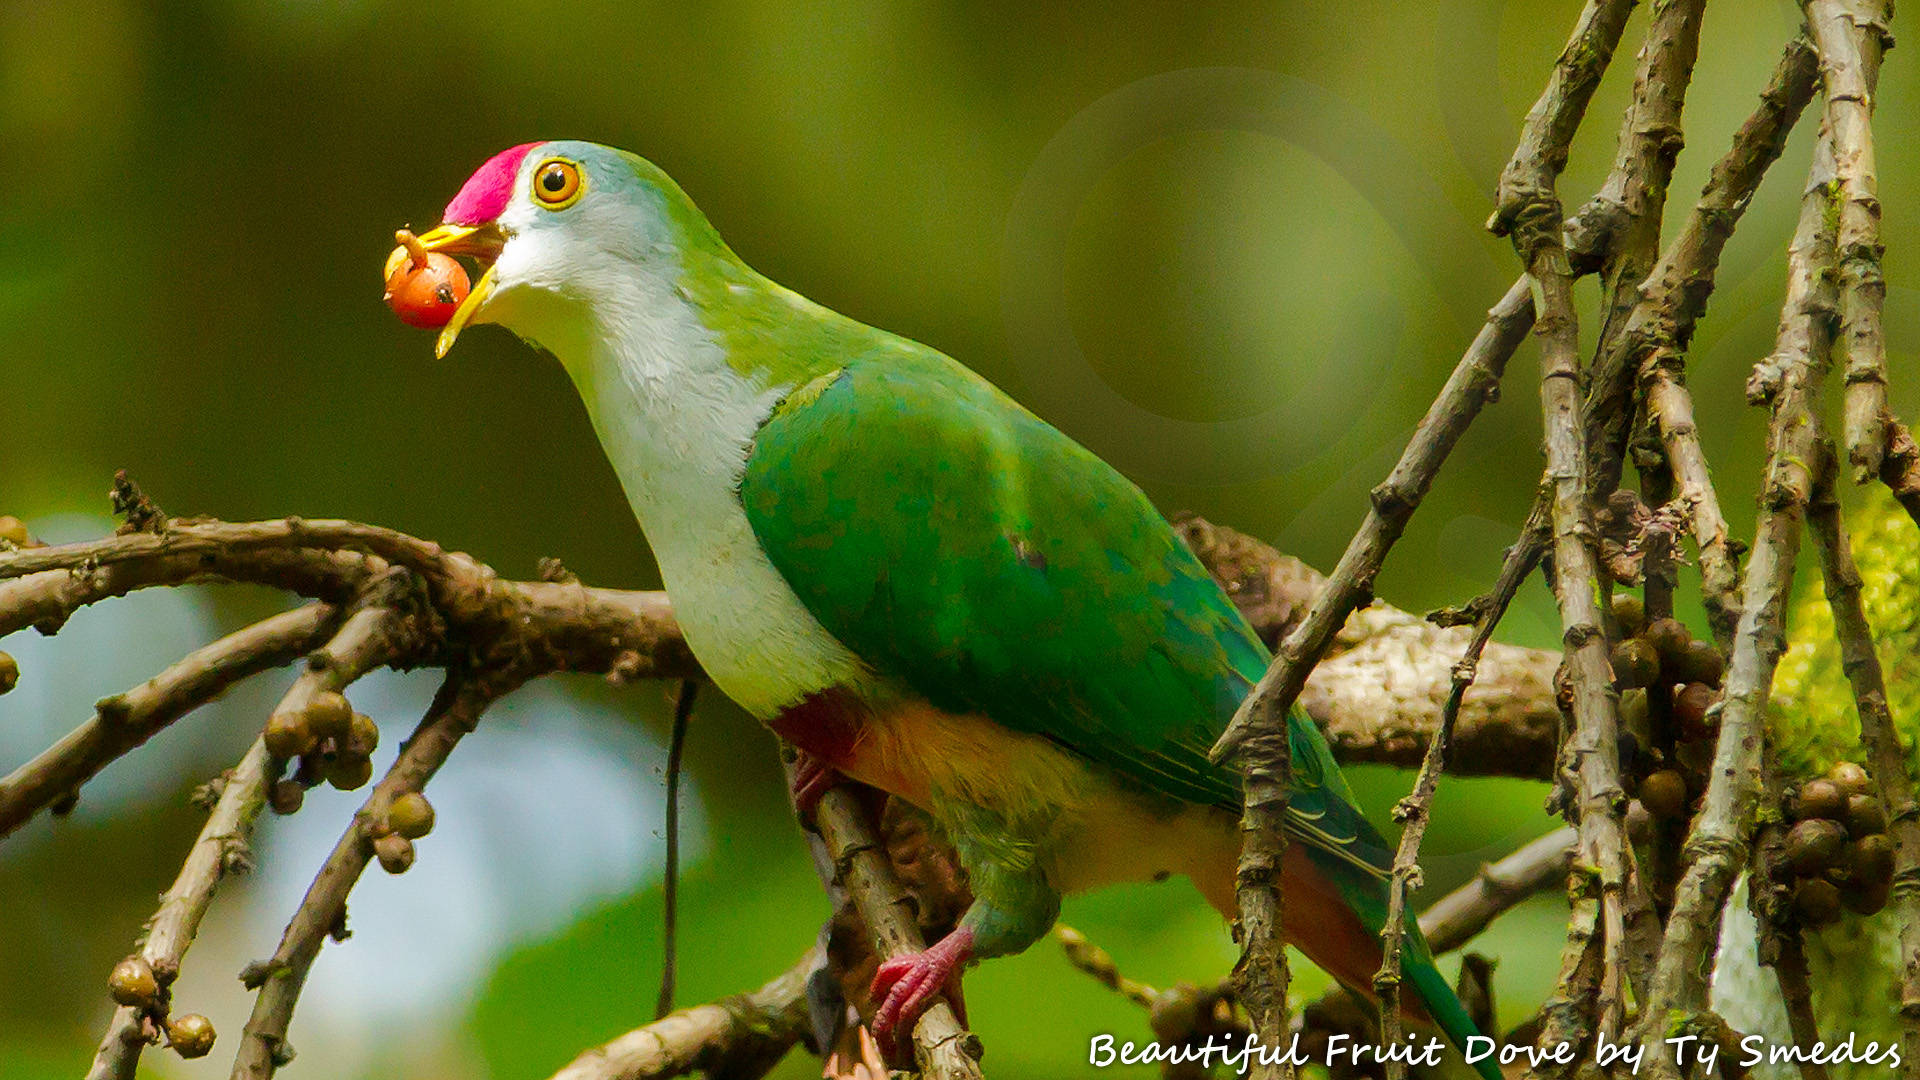 The lowland-dwelling Beautiful Fruit Dove Ptilinopus pulchellus is one of 289 New Guinea endemics that always is a thrill to see. Copyright © Ty Smedes